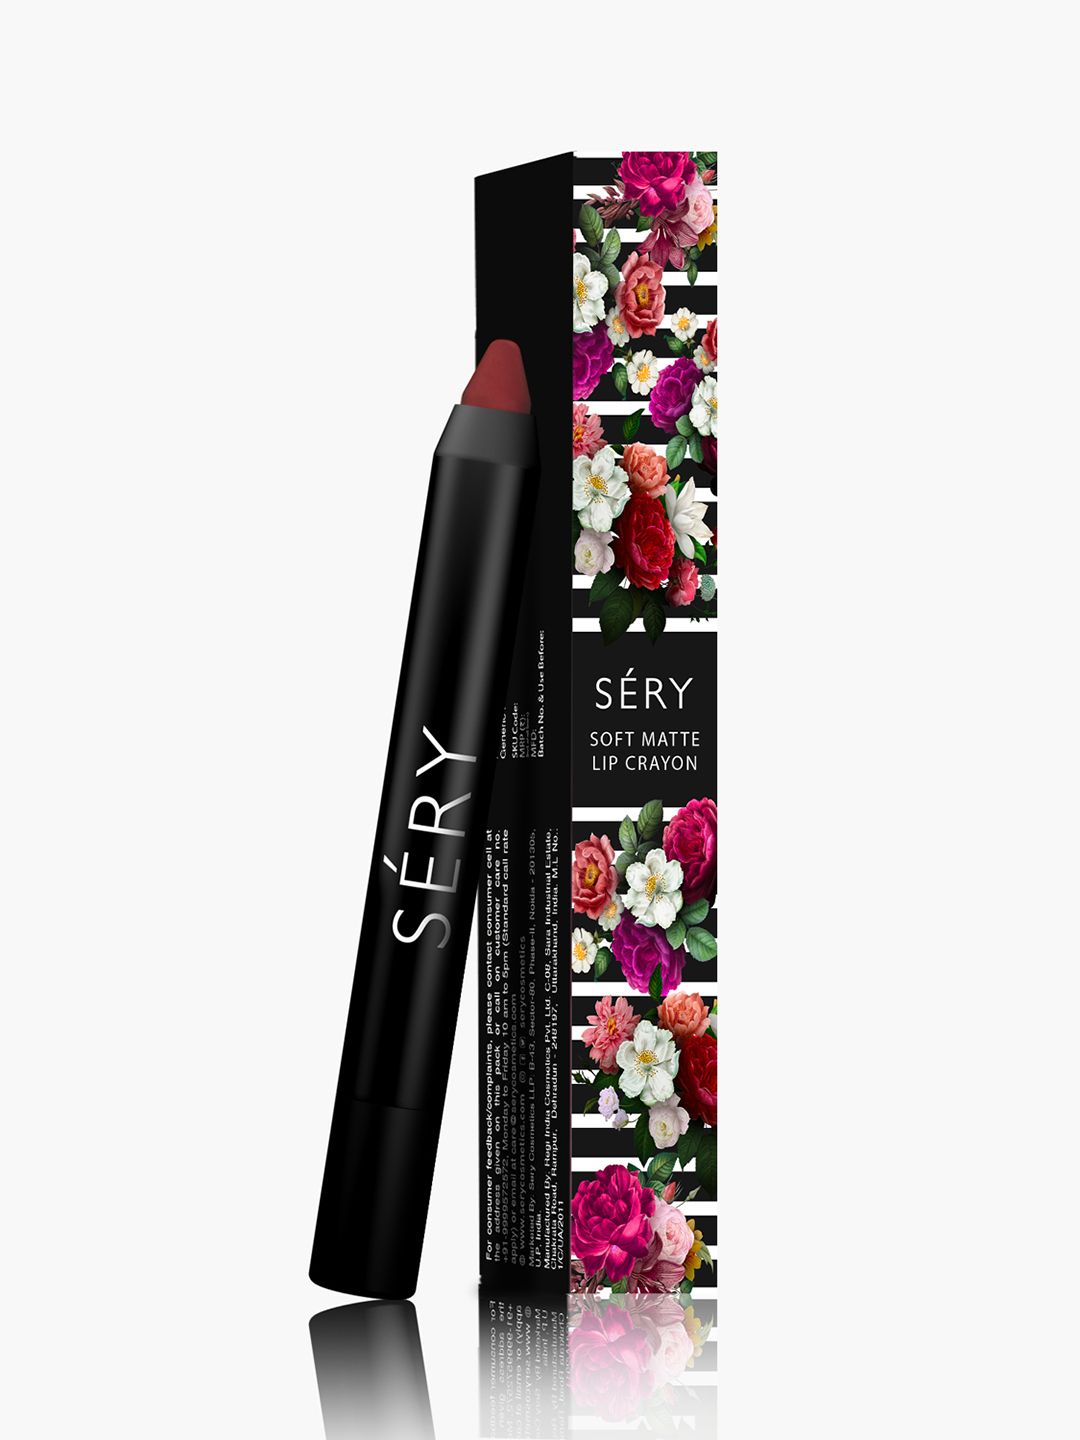 SERY Long-Lasting Transfer-Proof Soft Matte Lip Crayon - Everlasting Rum Price in India